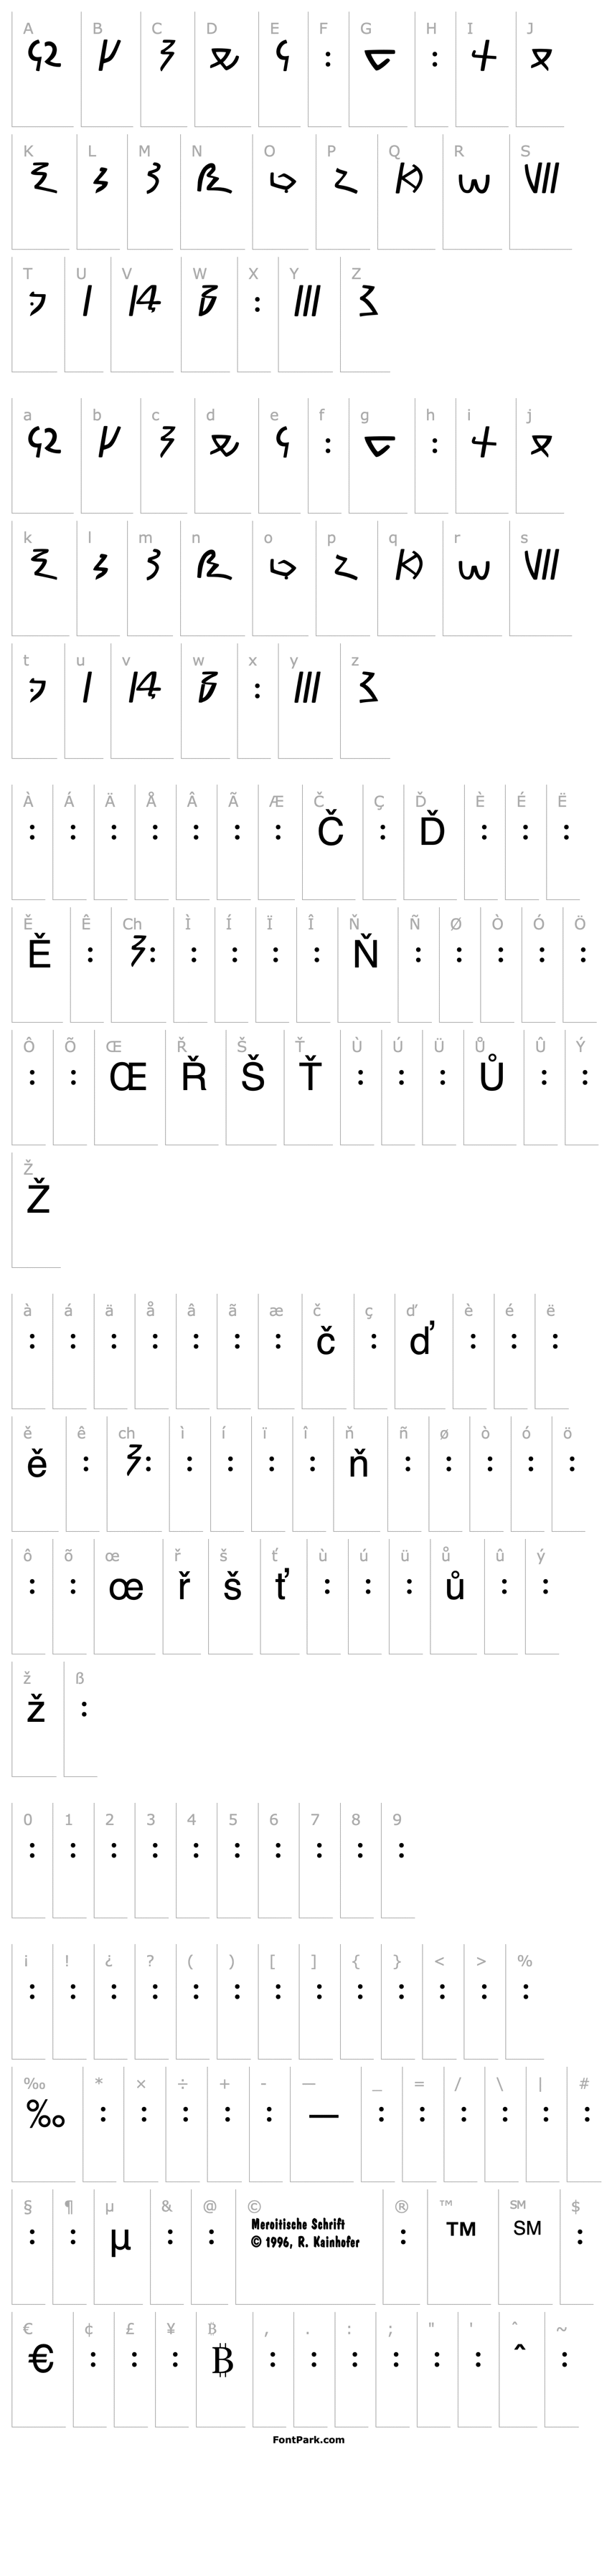 Přehled Meroitic - Demotic